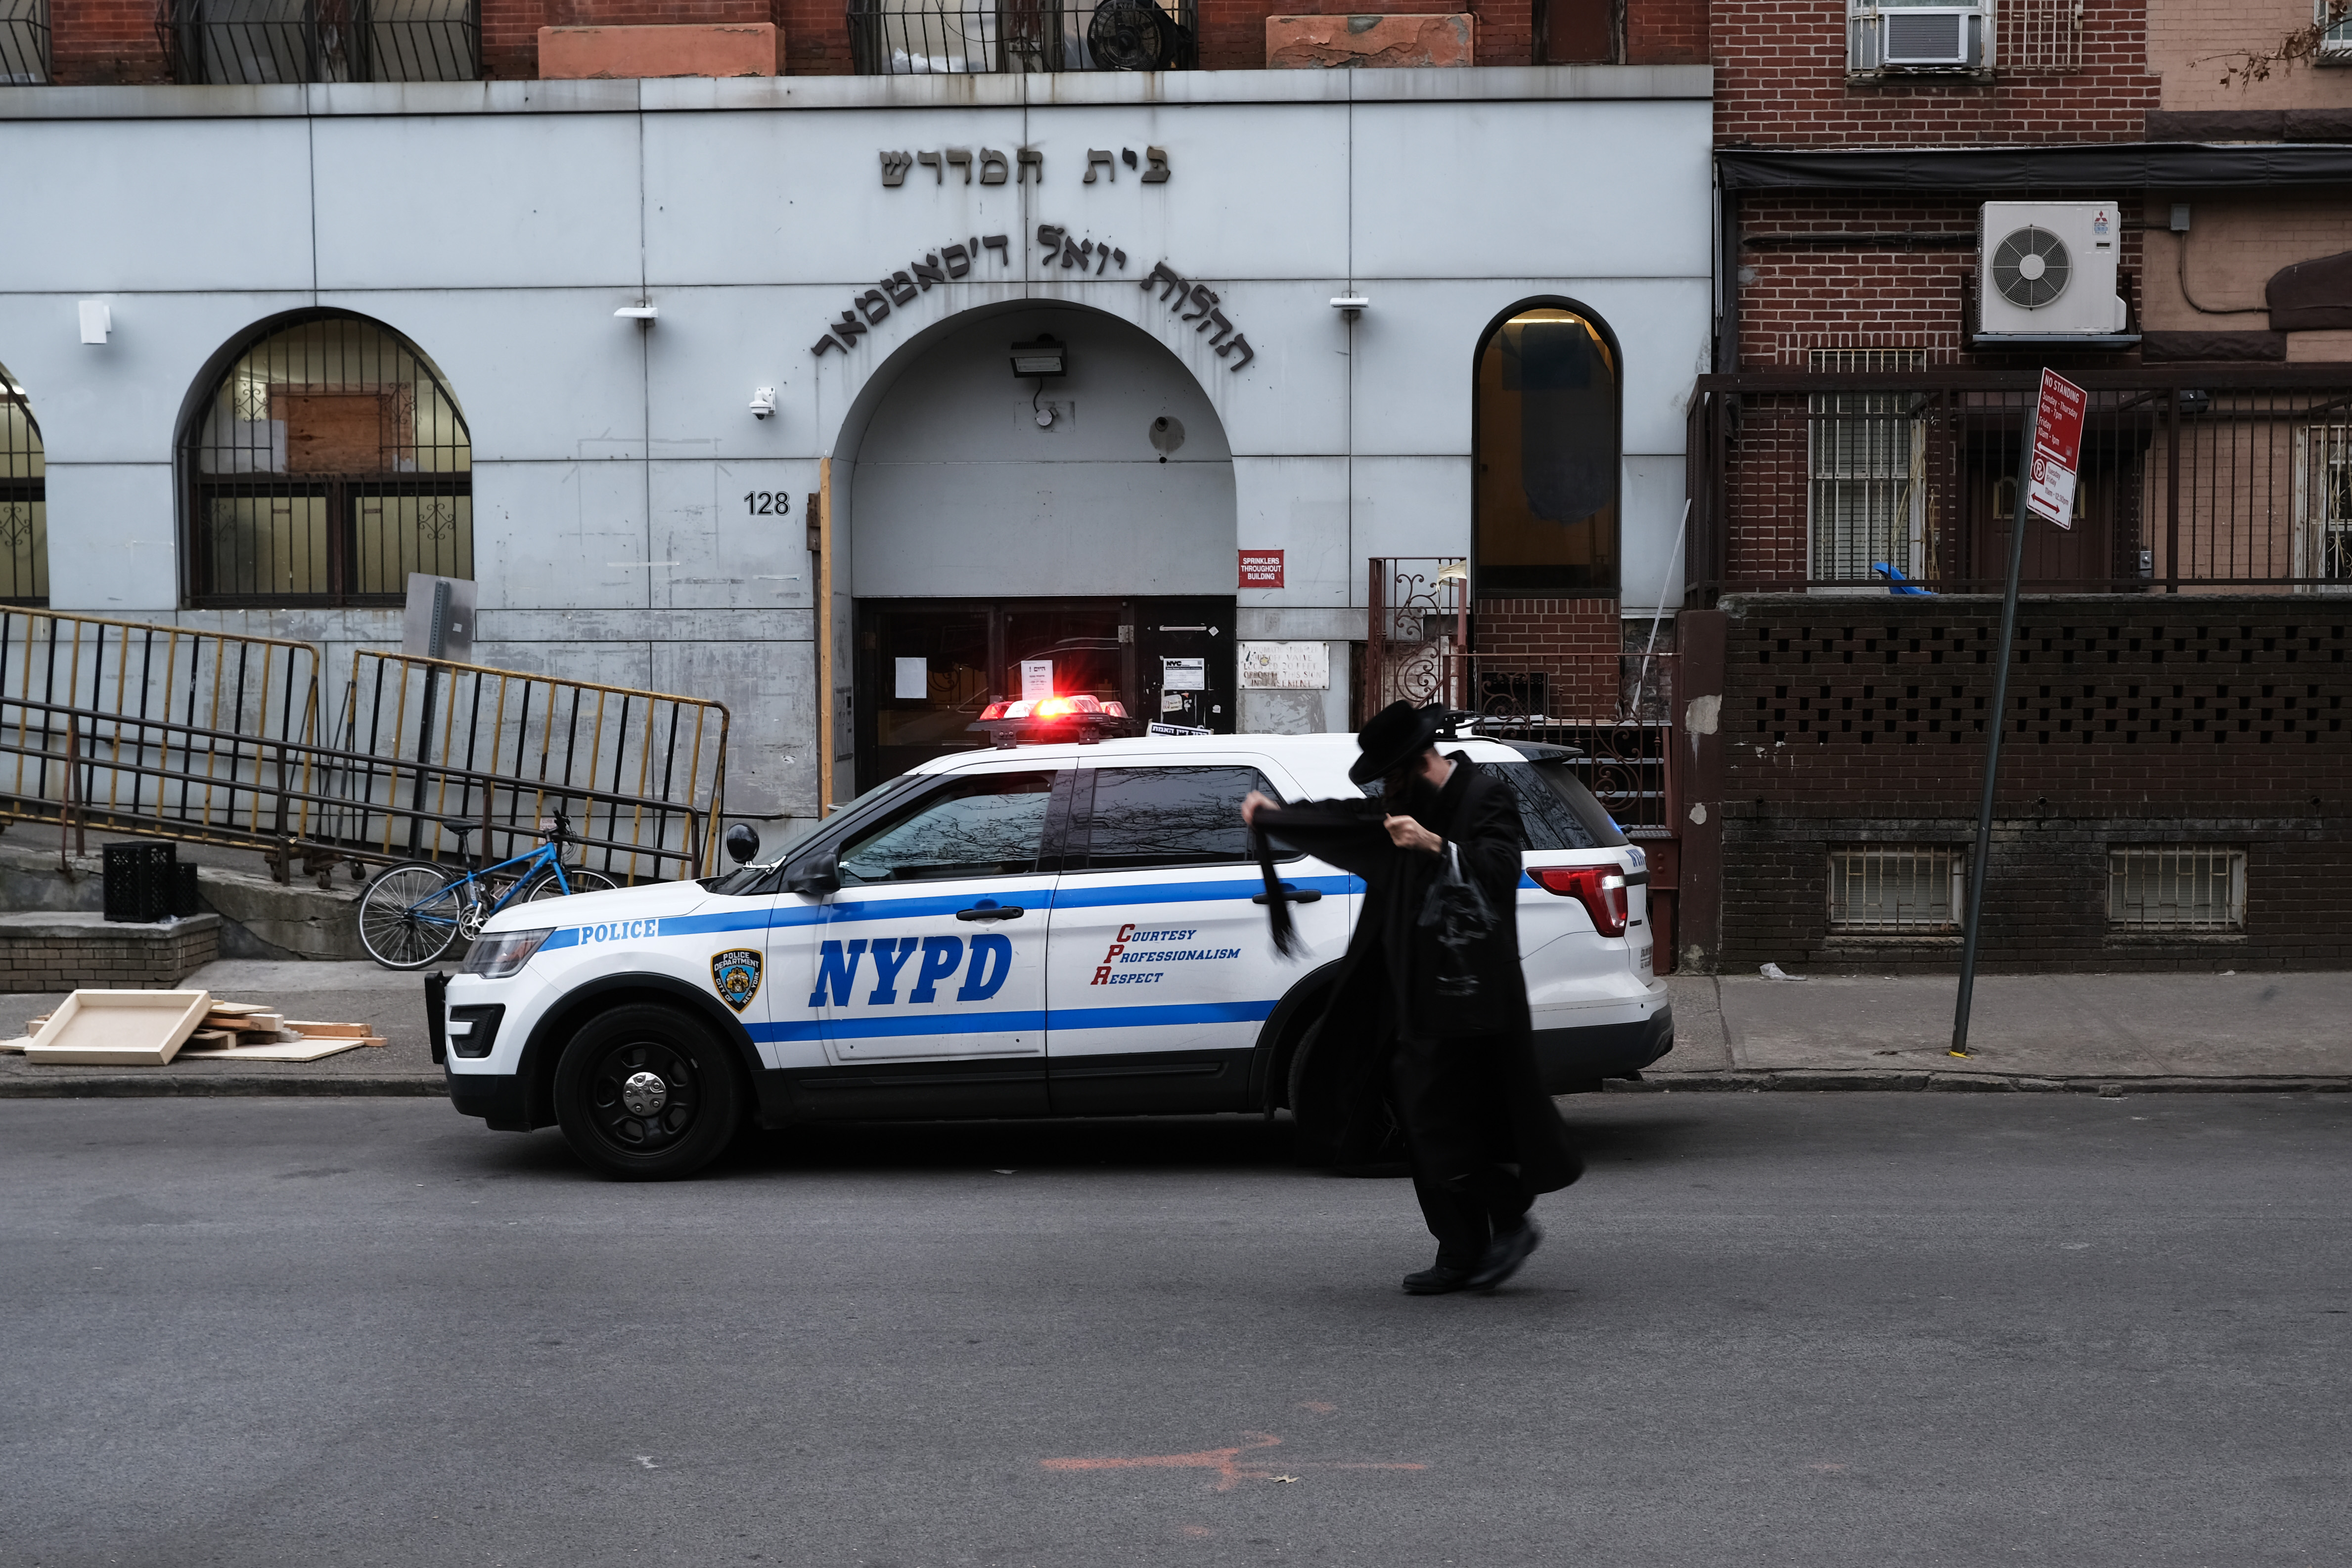 NEW YORK, NEW YORK - DECEMBER 29: A member of an Orthodox Jewish community walks through a Brooklyn neighborhood on December 29, 2019 in New York City. Five Orthodox Jews were stabbed by an intruder at a rabbi's house during a Hannukah party on Saturday evening in the upstate New York town of Monsey. Tensions remain high in Jewish communities following a series of attacks and incidents in recent weeks. (Photo by Spencer Platt/Getty Images)